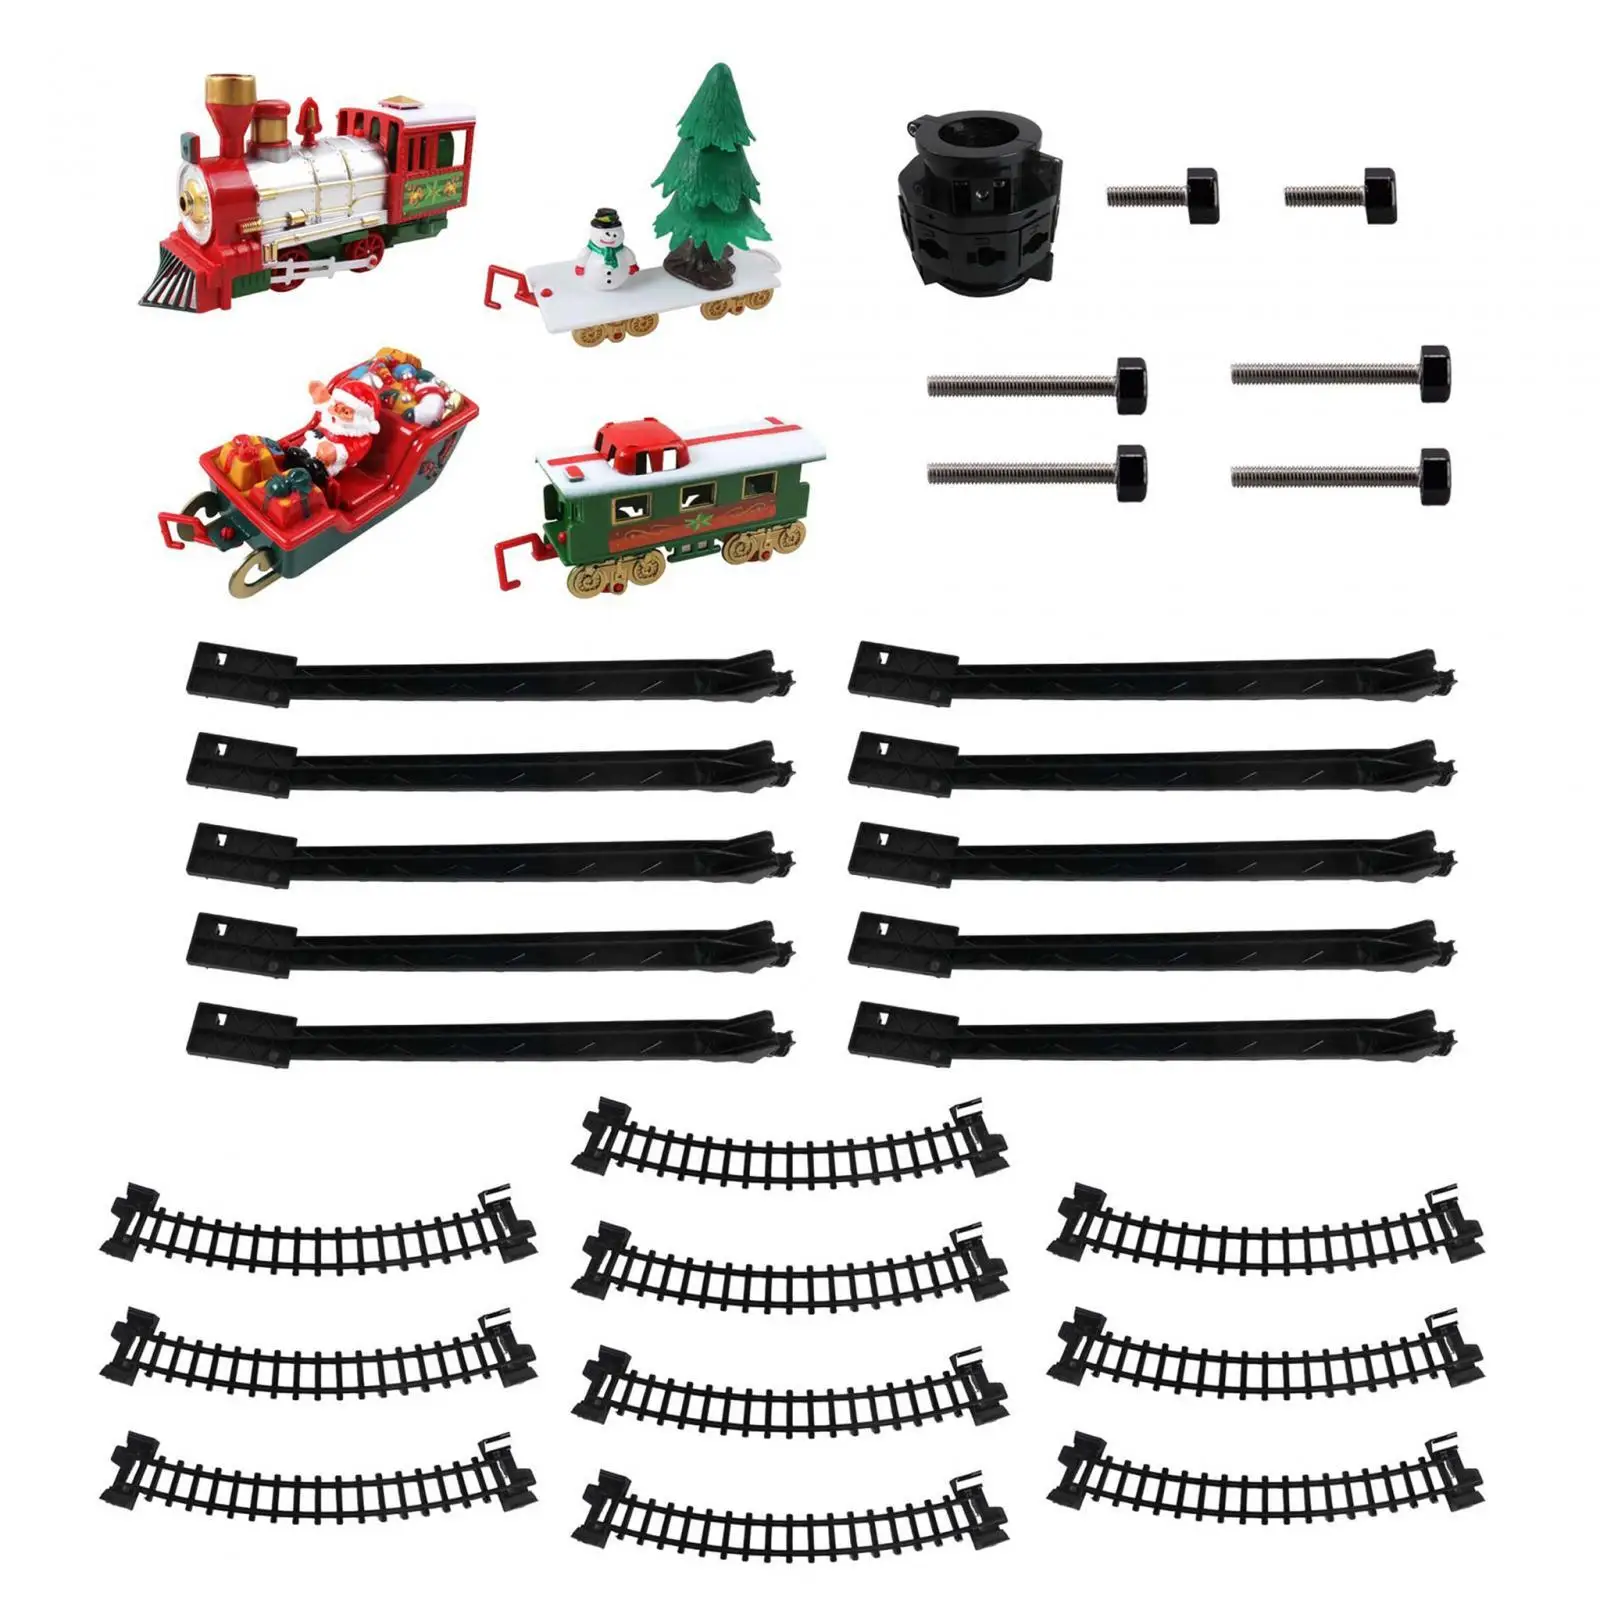 Christmas Train Set DIY Cargo Cars and 10 Tracks Battery Powered Train Set Toy Gifts for Girls Boys Children 3 4 5 6 Year Old